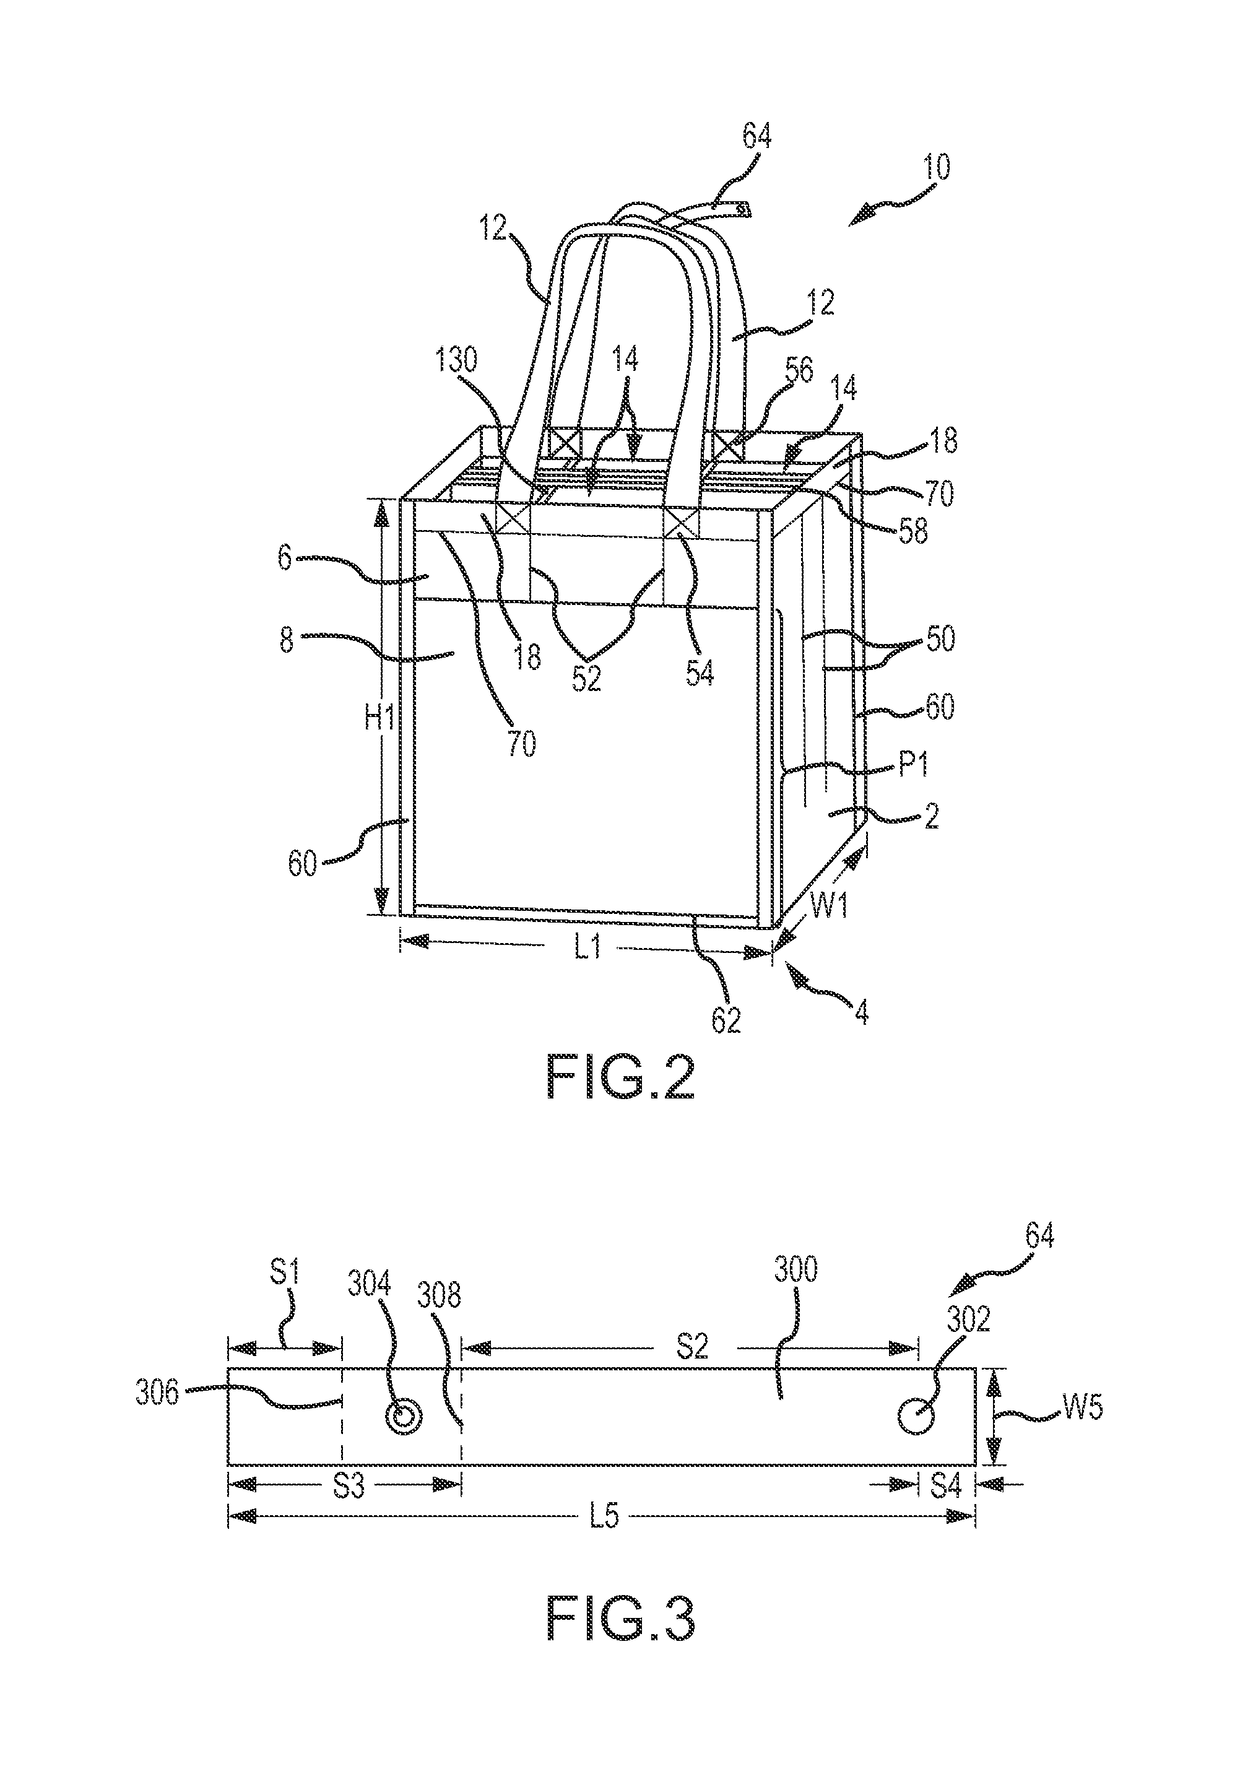 Reusable bag holder and system and method of using the same